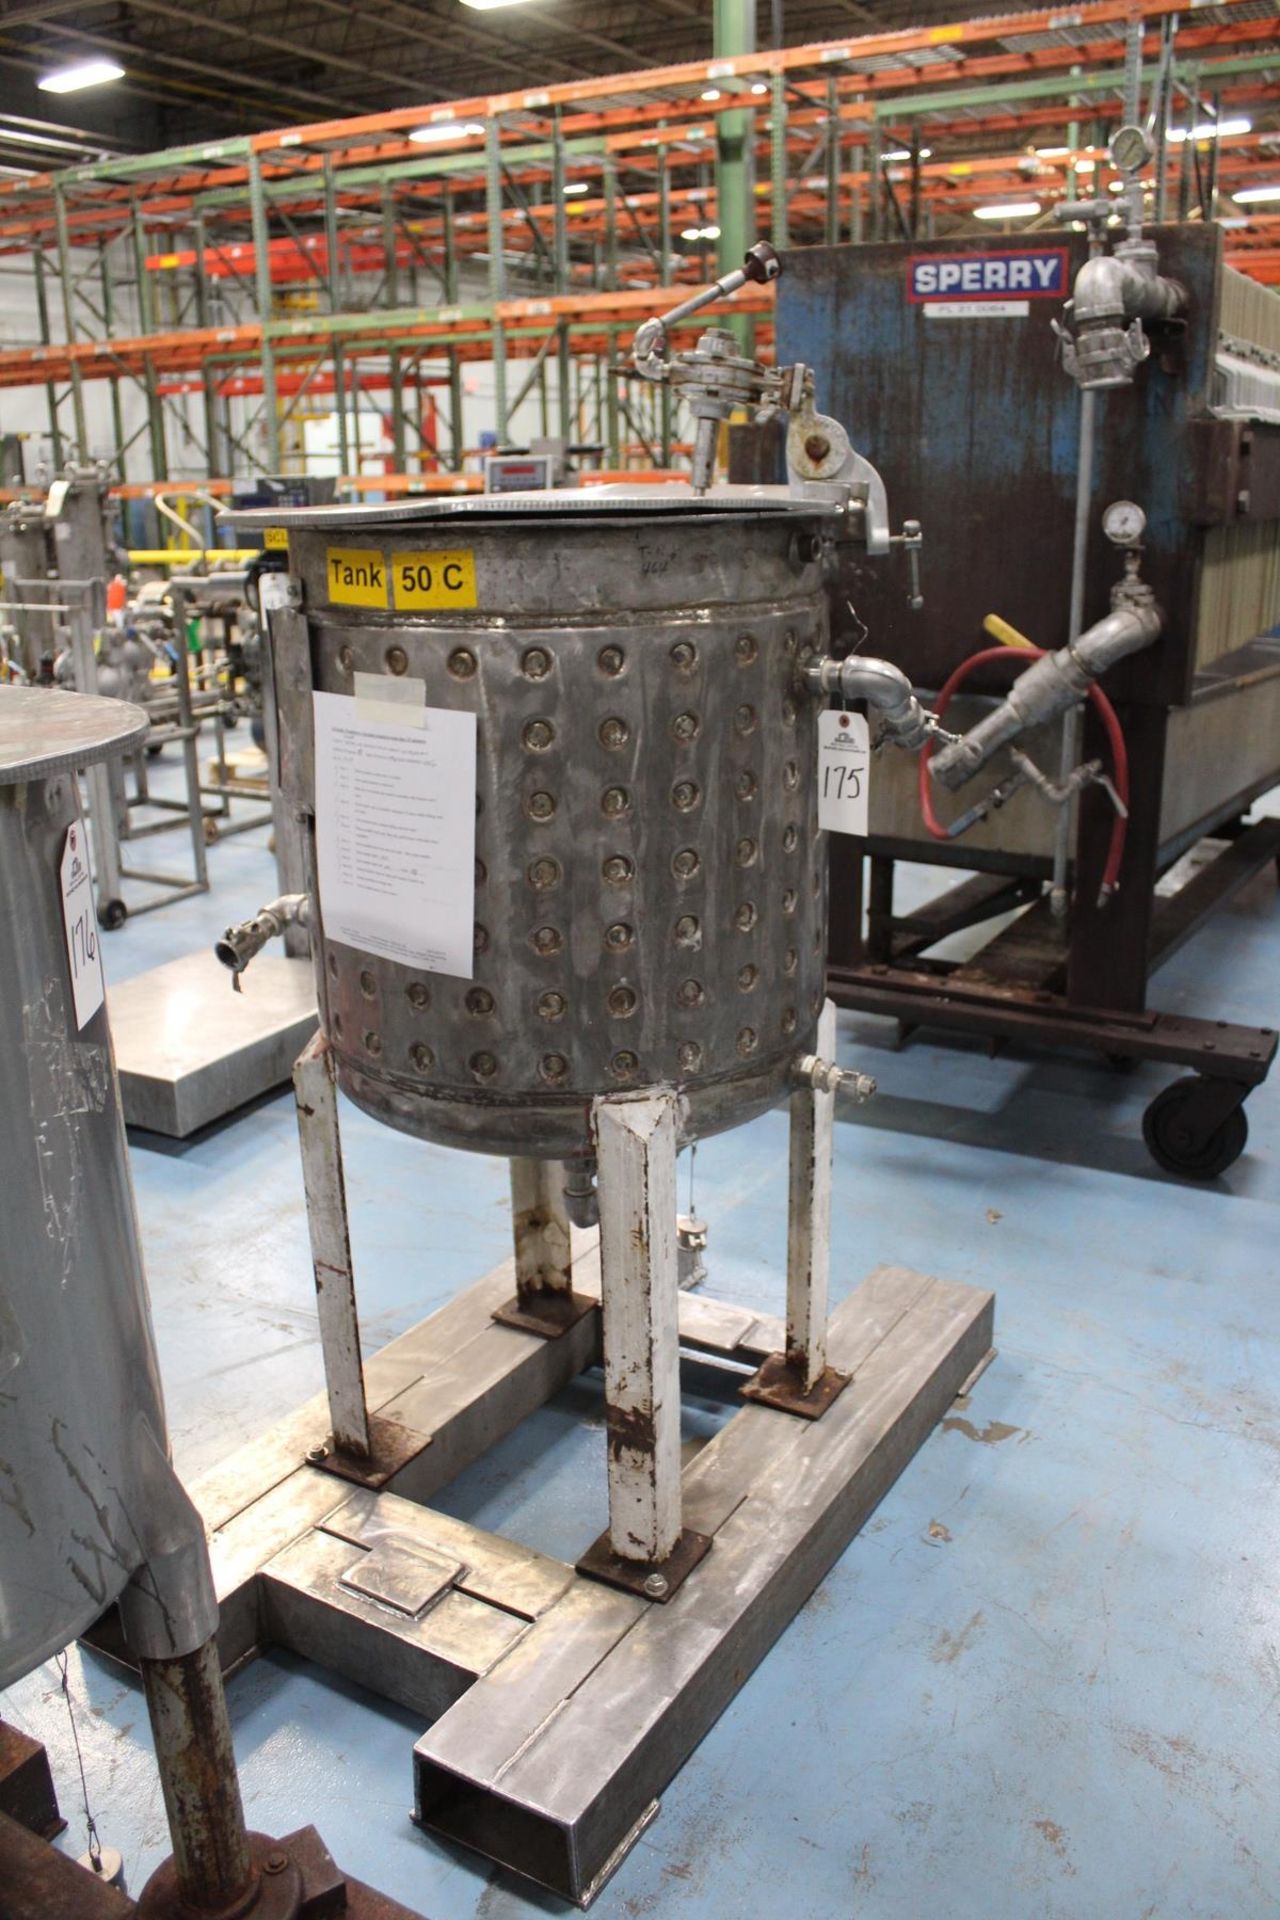 Stainless Steel 50 Gallon Dimple Jacketed, Agitated Mixing Vessel, (Ref. Tank 50C) | Rig Fee $50